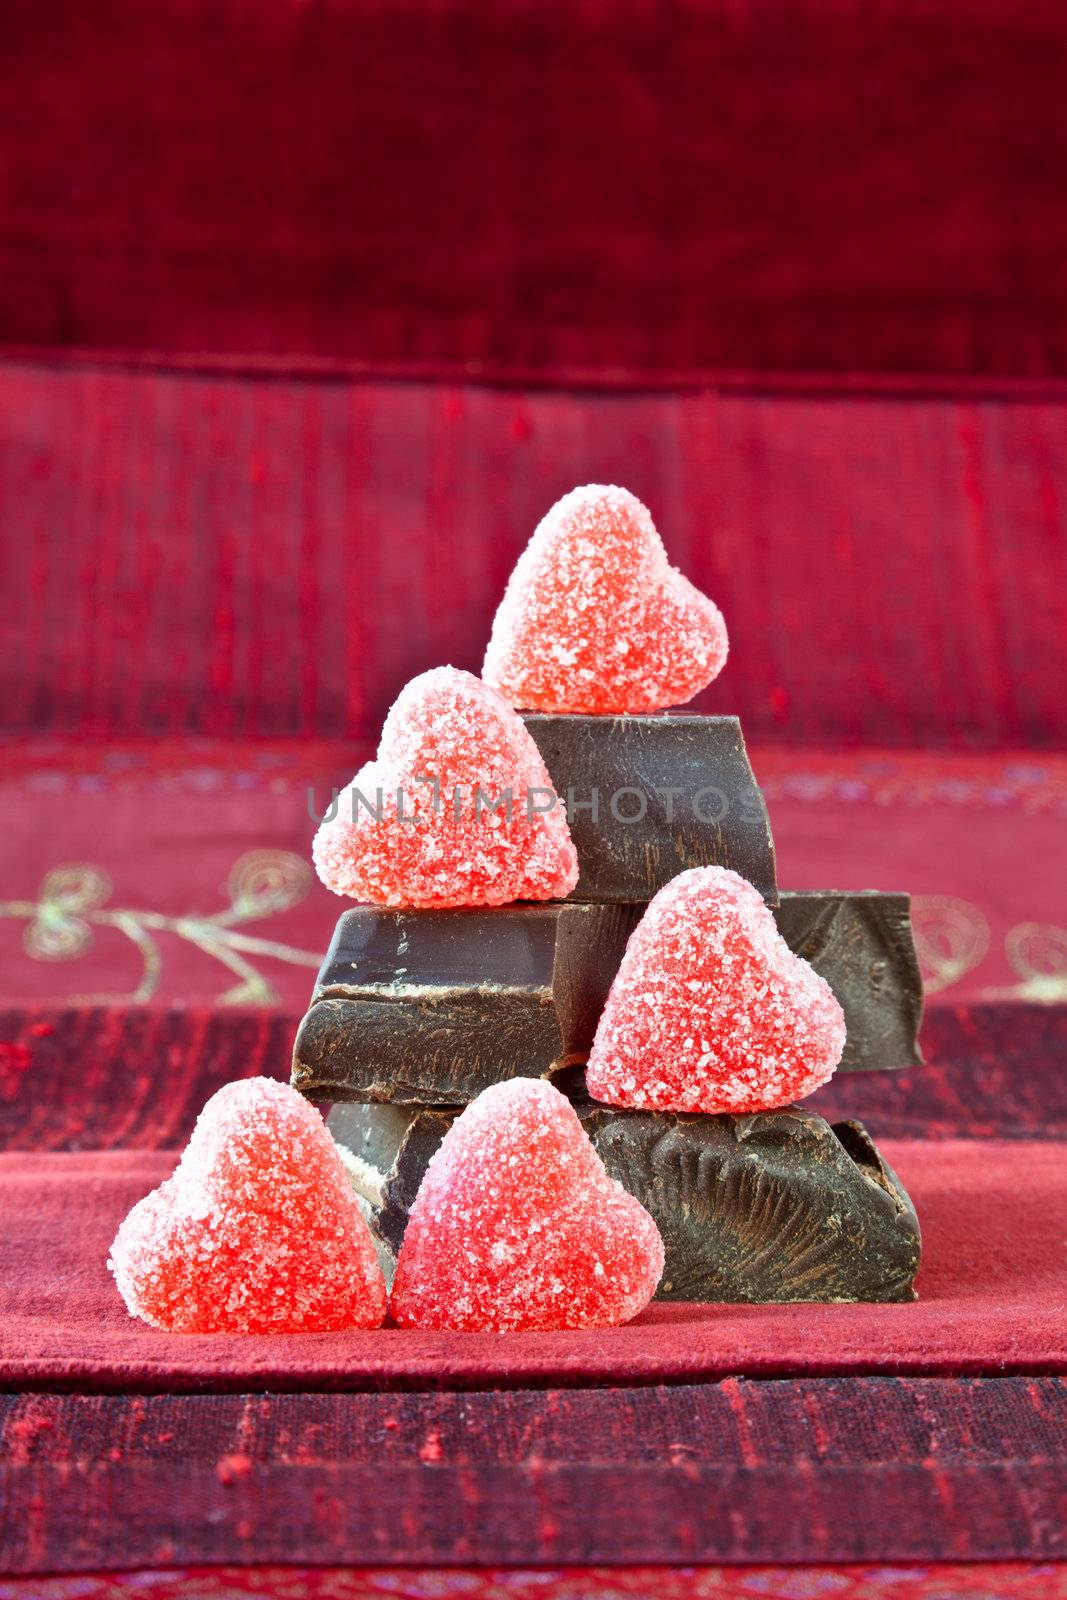 Candy Hearts on a Pile of Dark Chocolate Pieces by DashaRosato